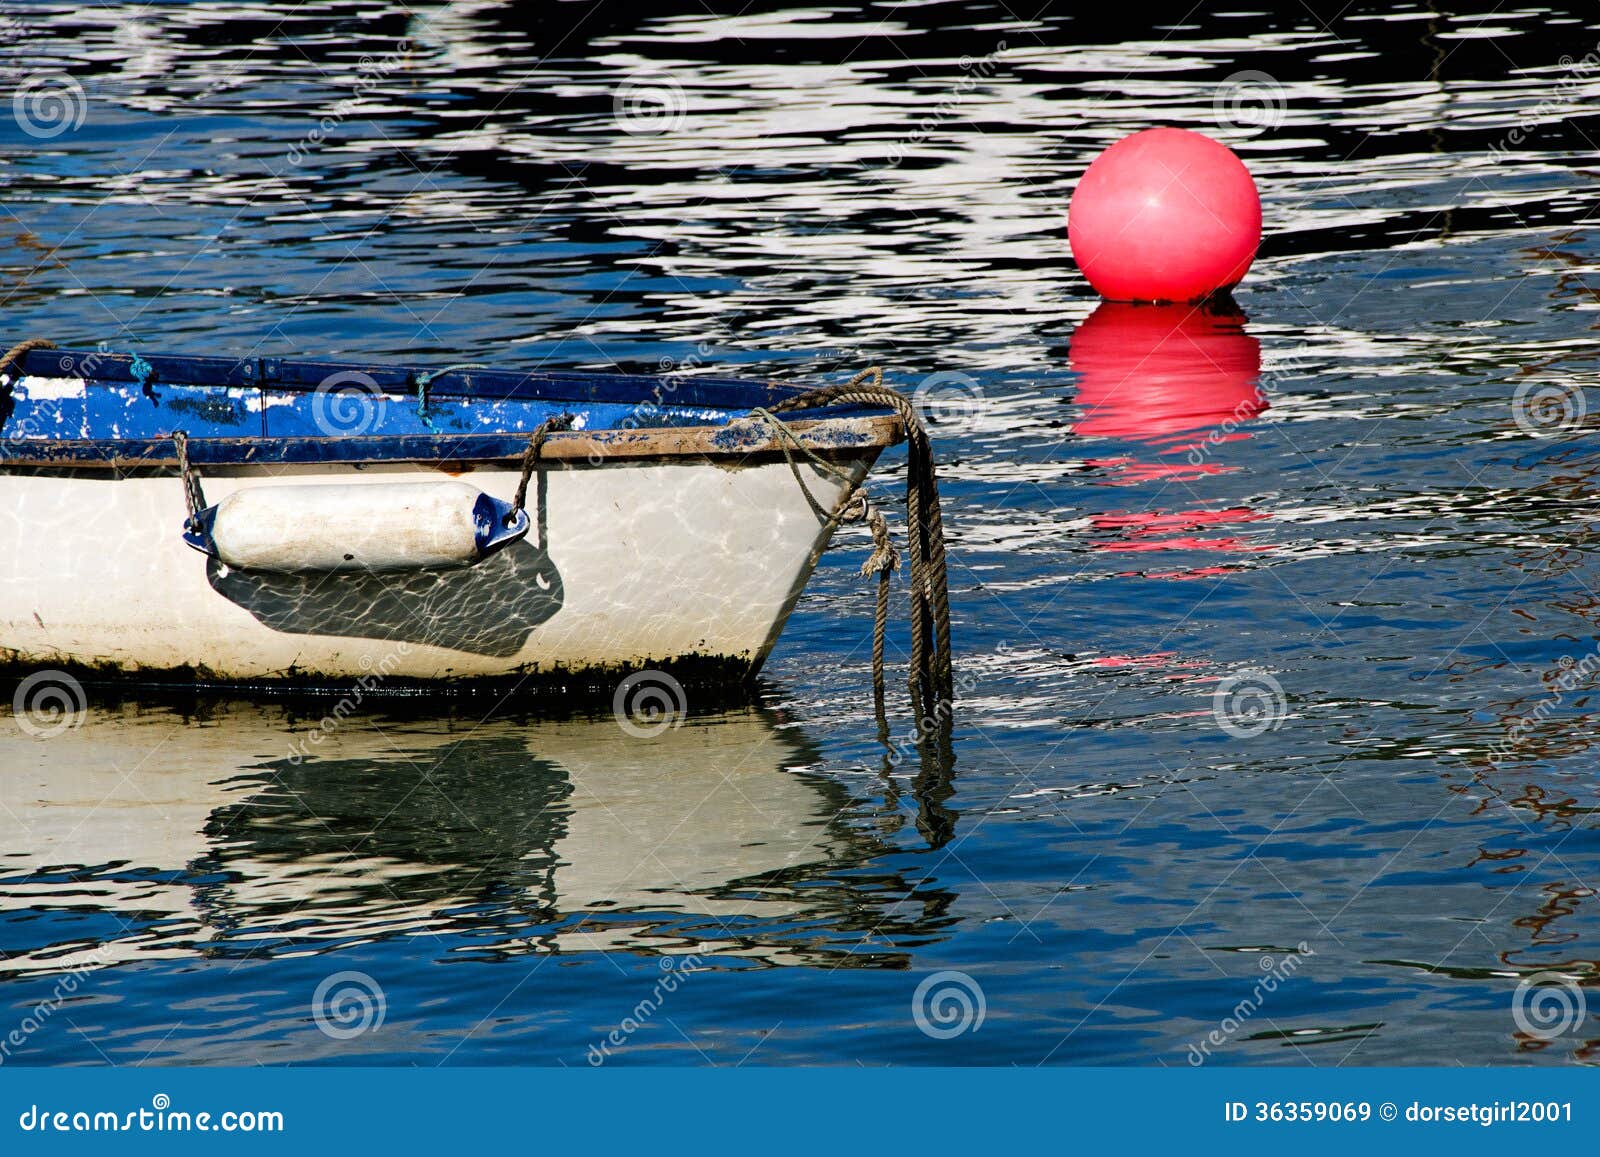 white skiff with pink buoy